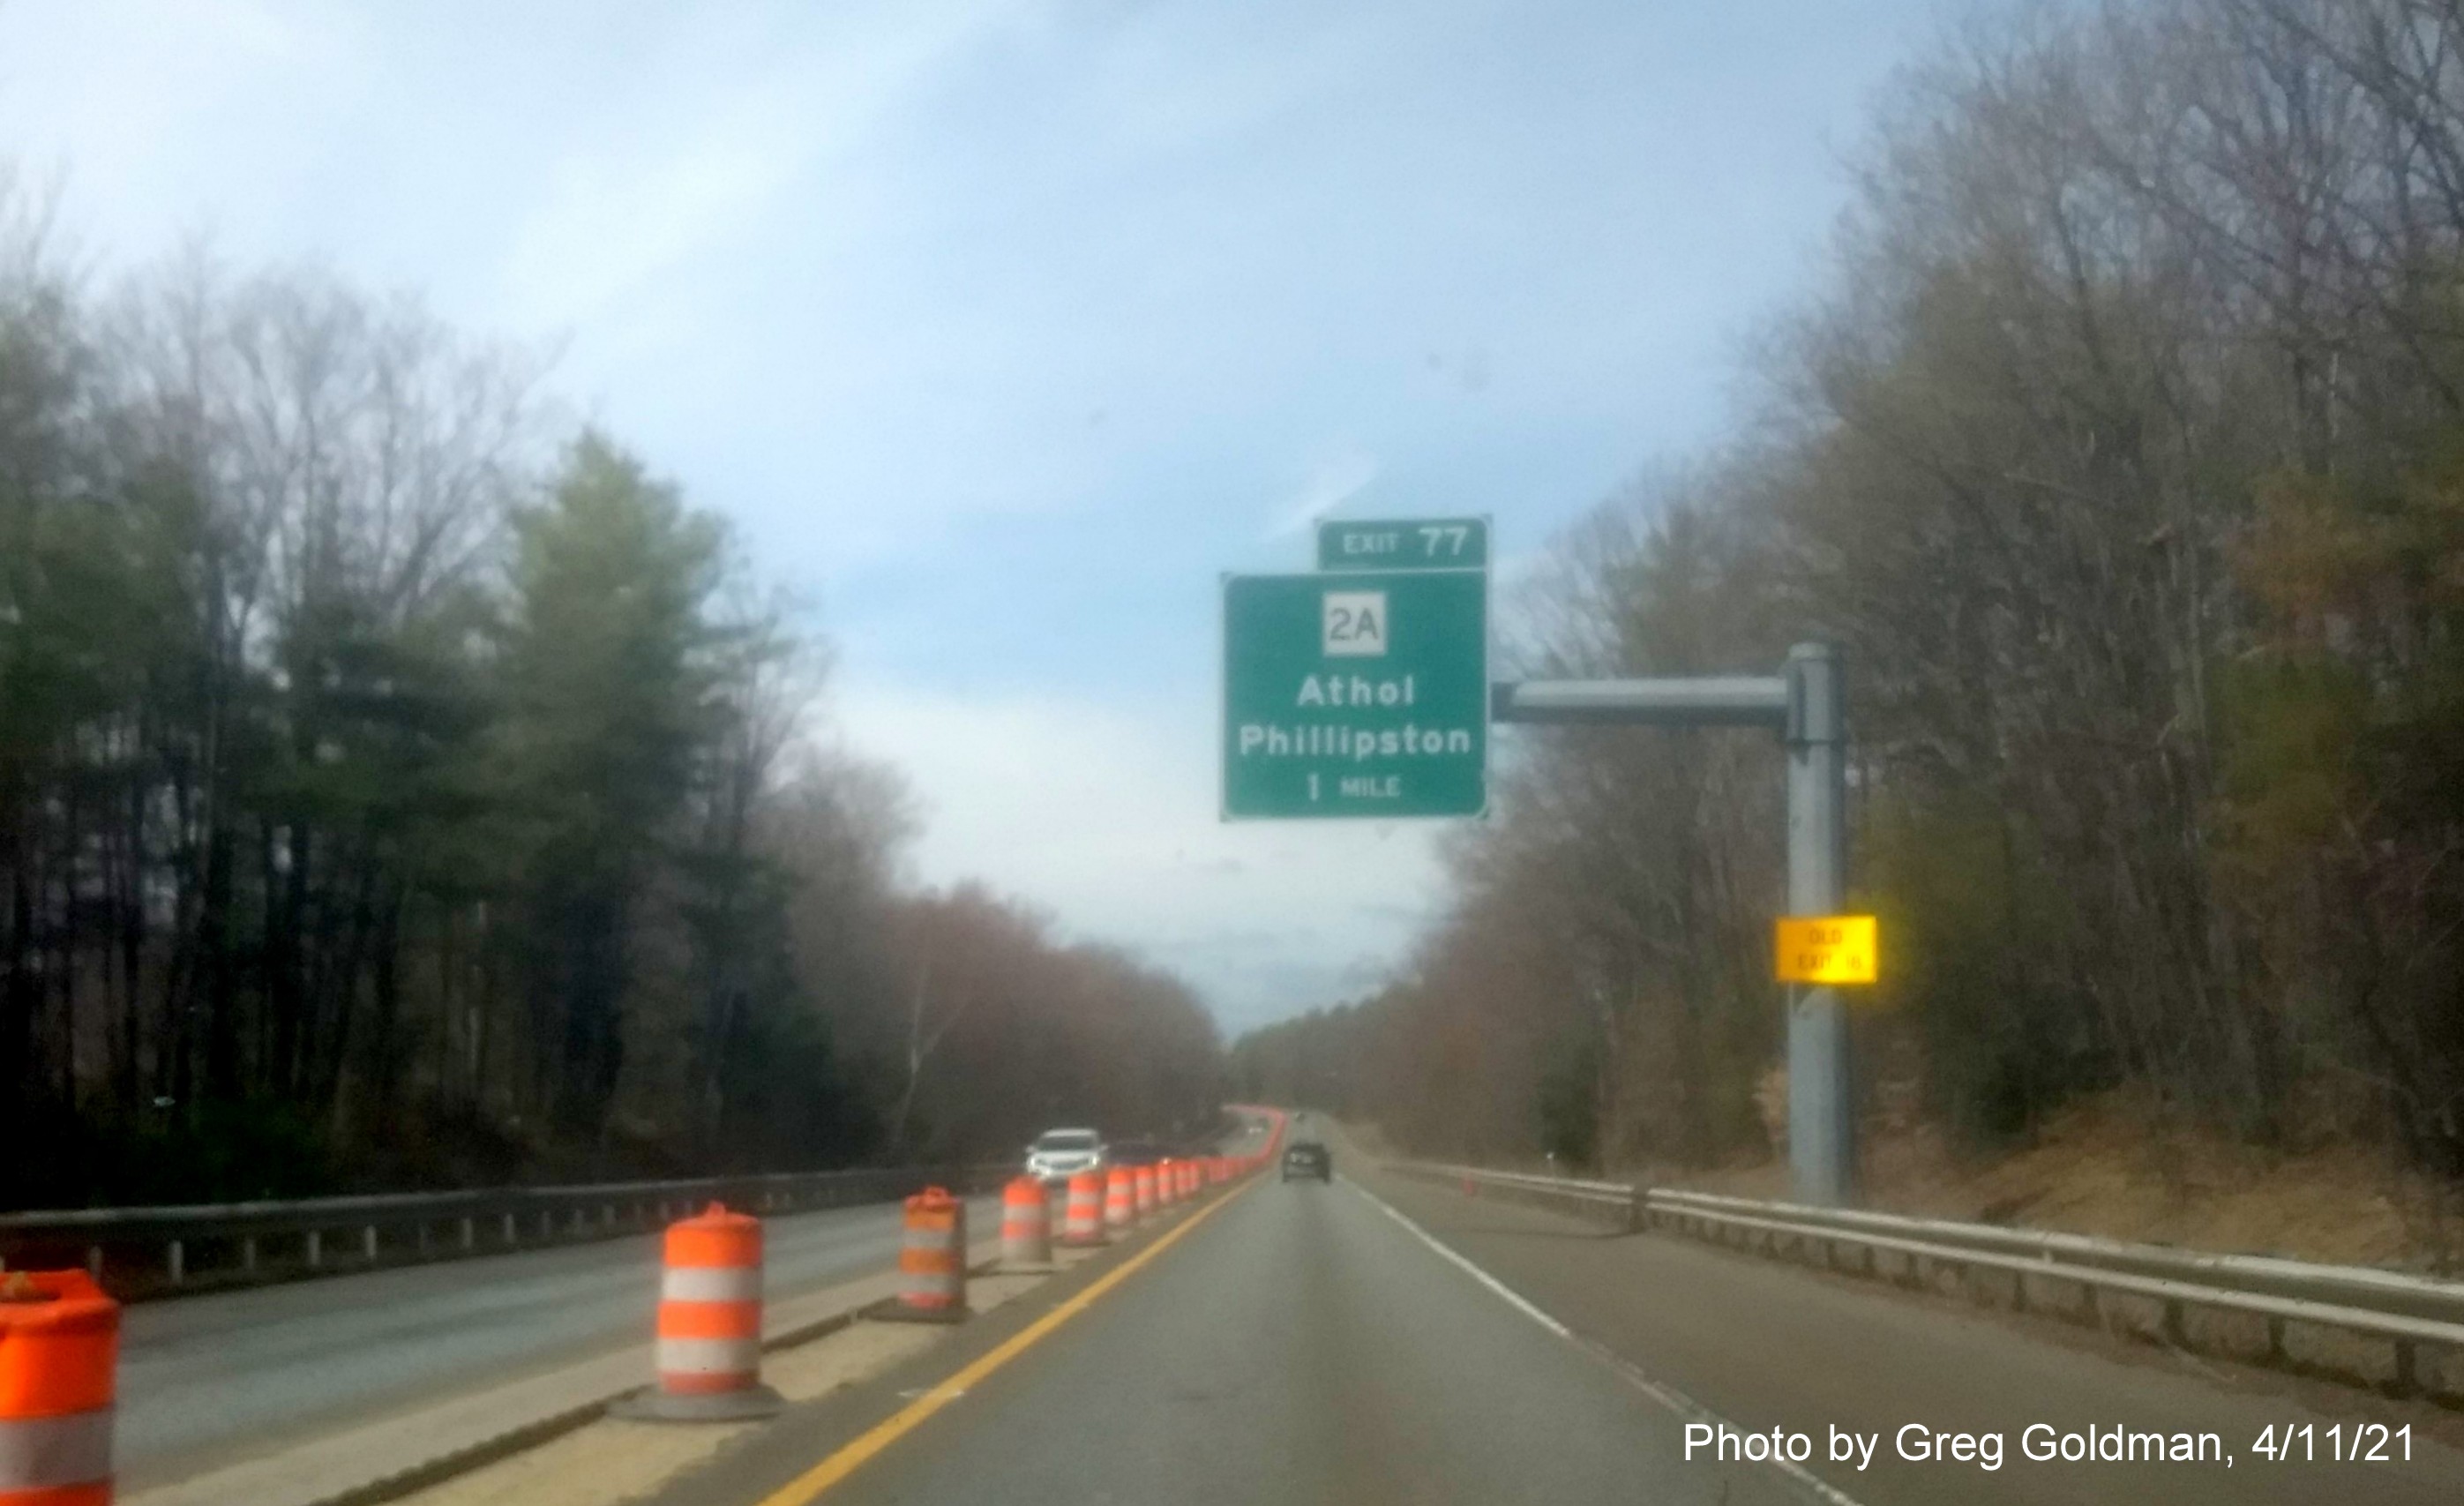 Image of 1 Mile advance sign for MA 2A exit with new milepost based exit number with yellow Old Exit 18 advisory sign on support on MA 2 West in Athol, by Greg Goldman, April 2021